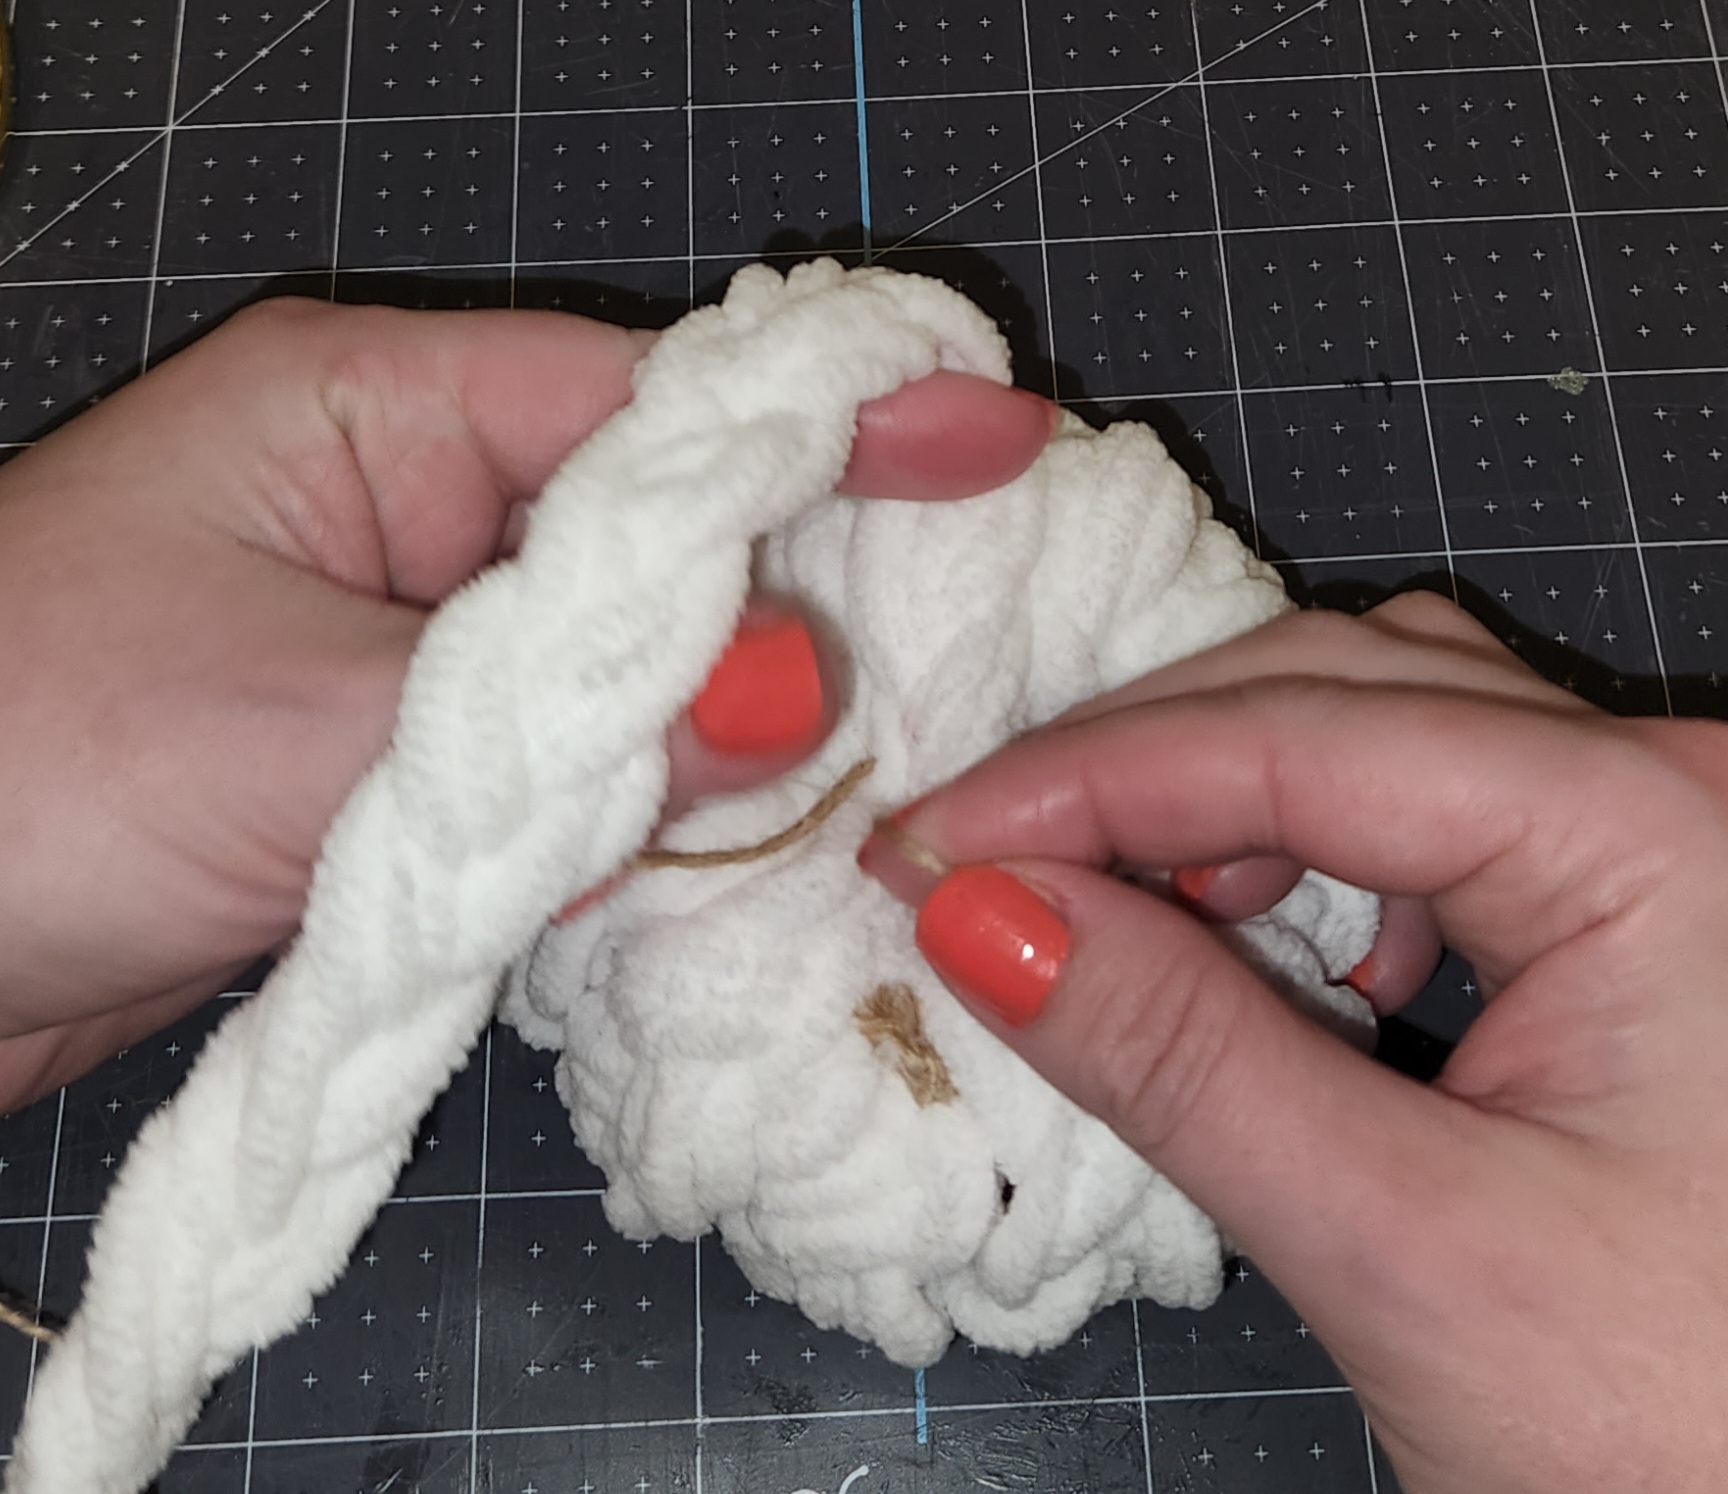 Tying off the end of the braided yarn with a piece of twine before cutting it off from the pumpkin.